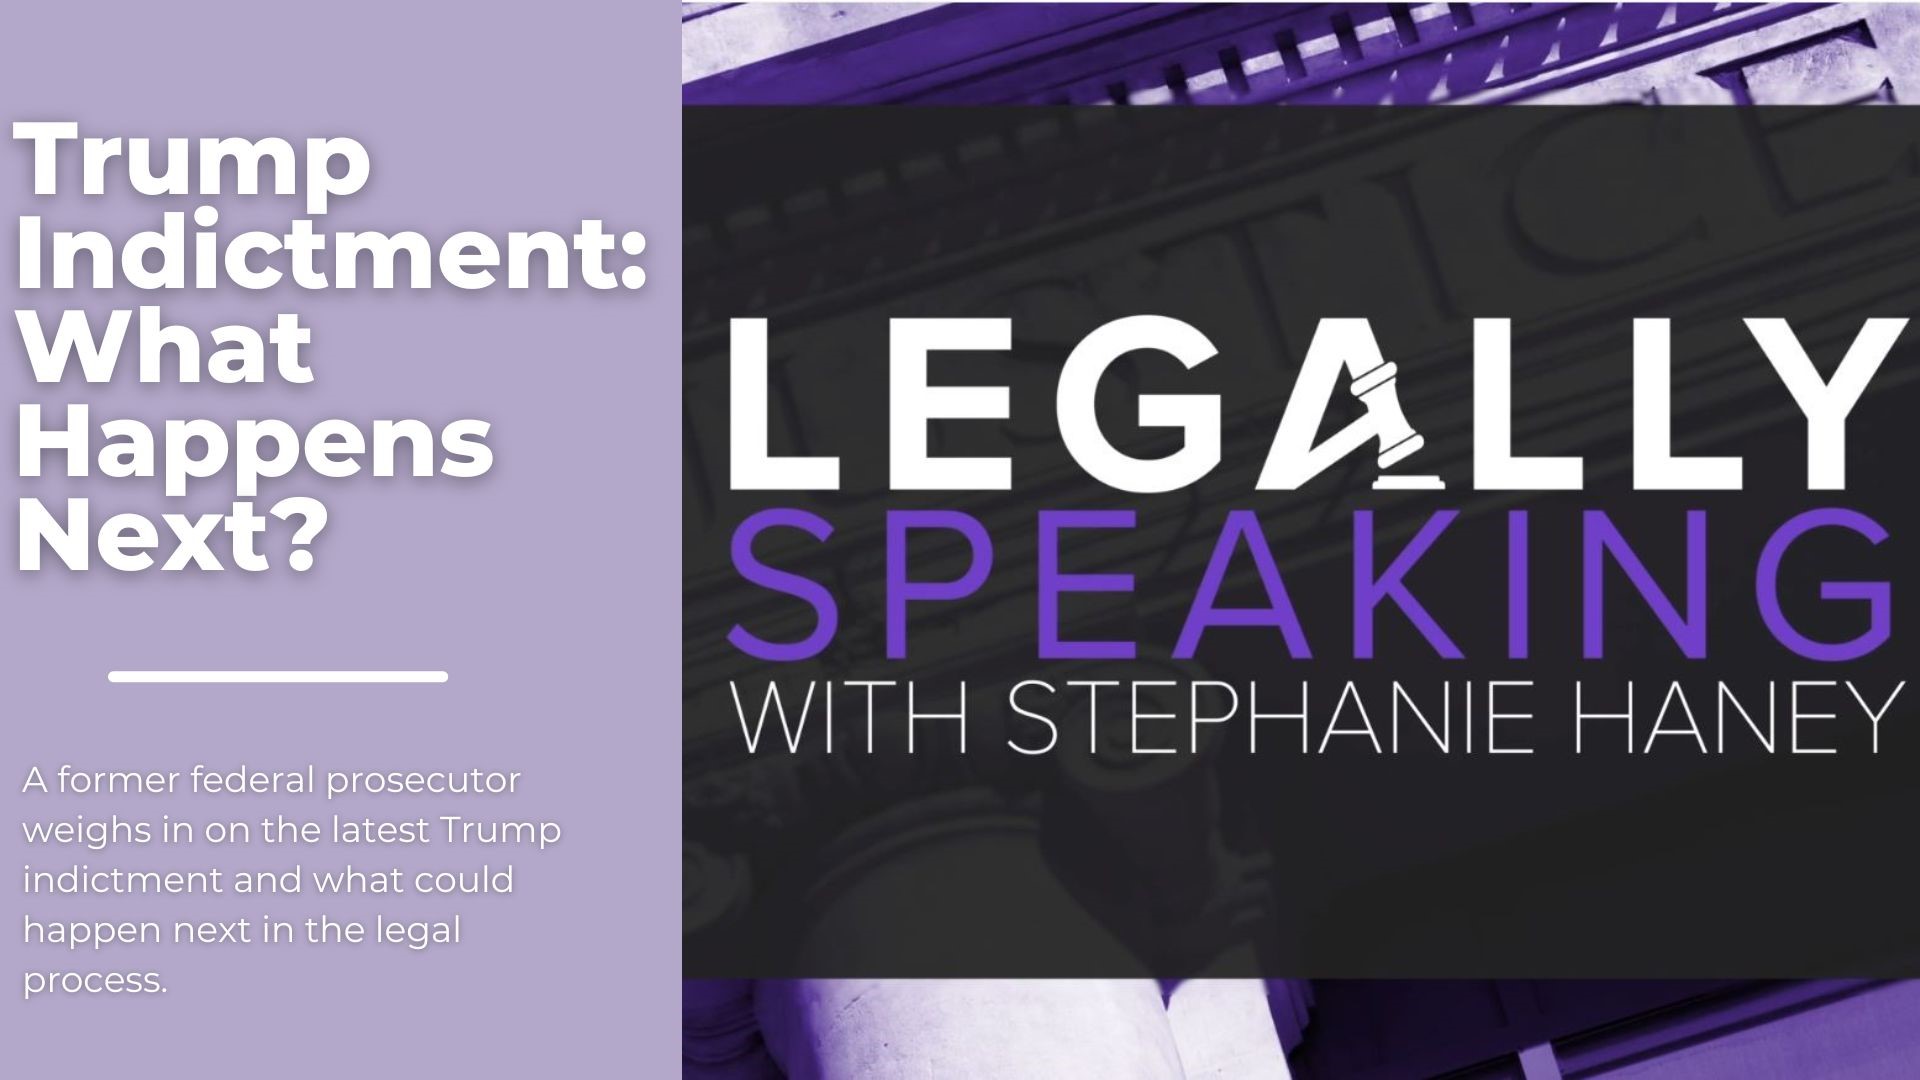 Stephanie Haney talks with a former federal prosecutor on the latest Trump indictment and what could happen next in the legal process.